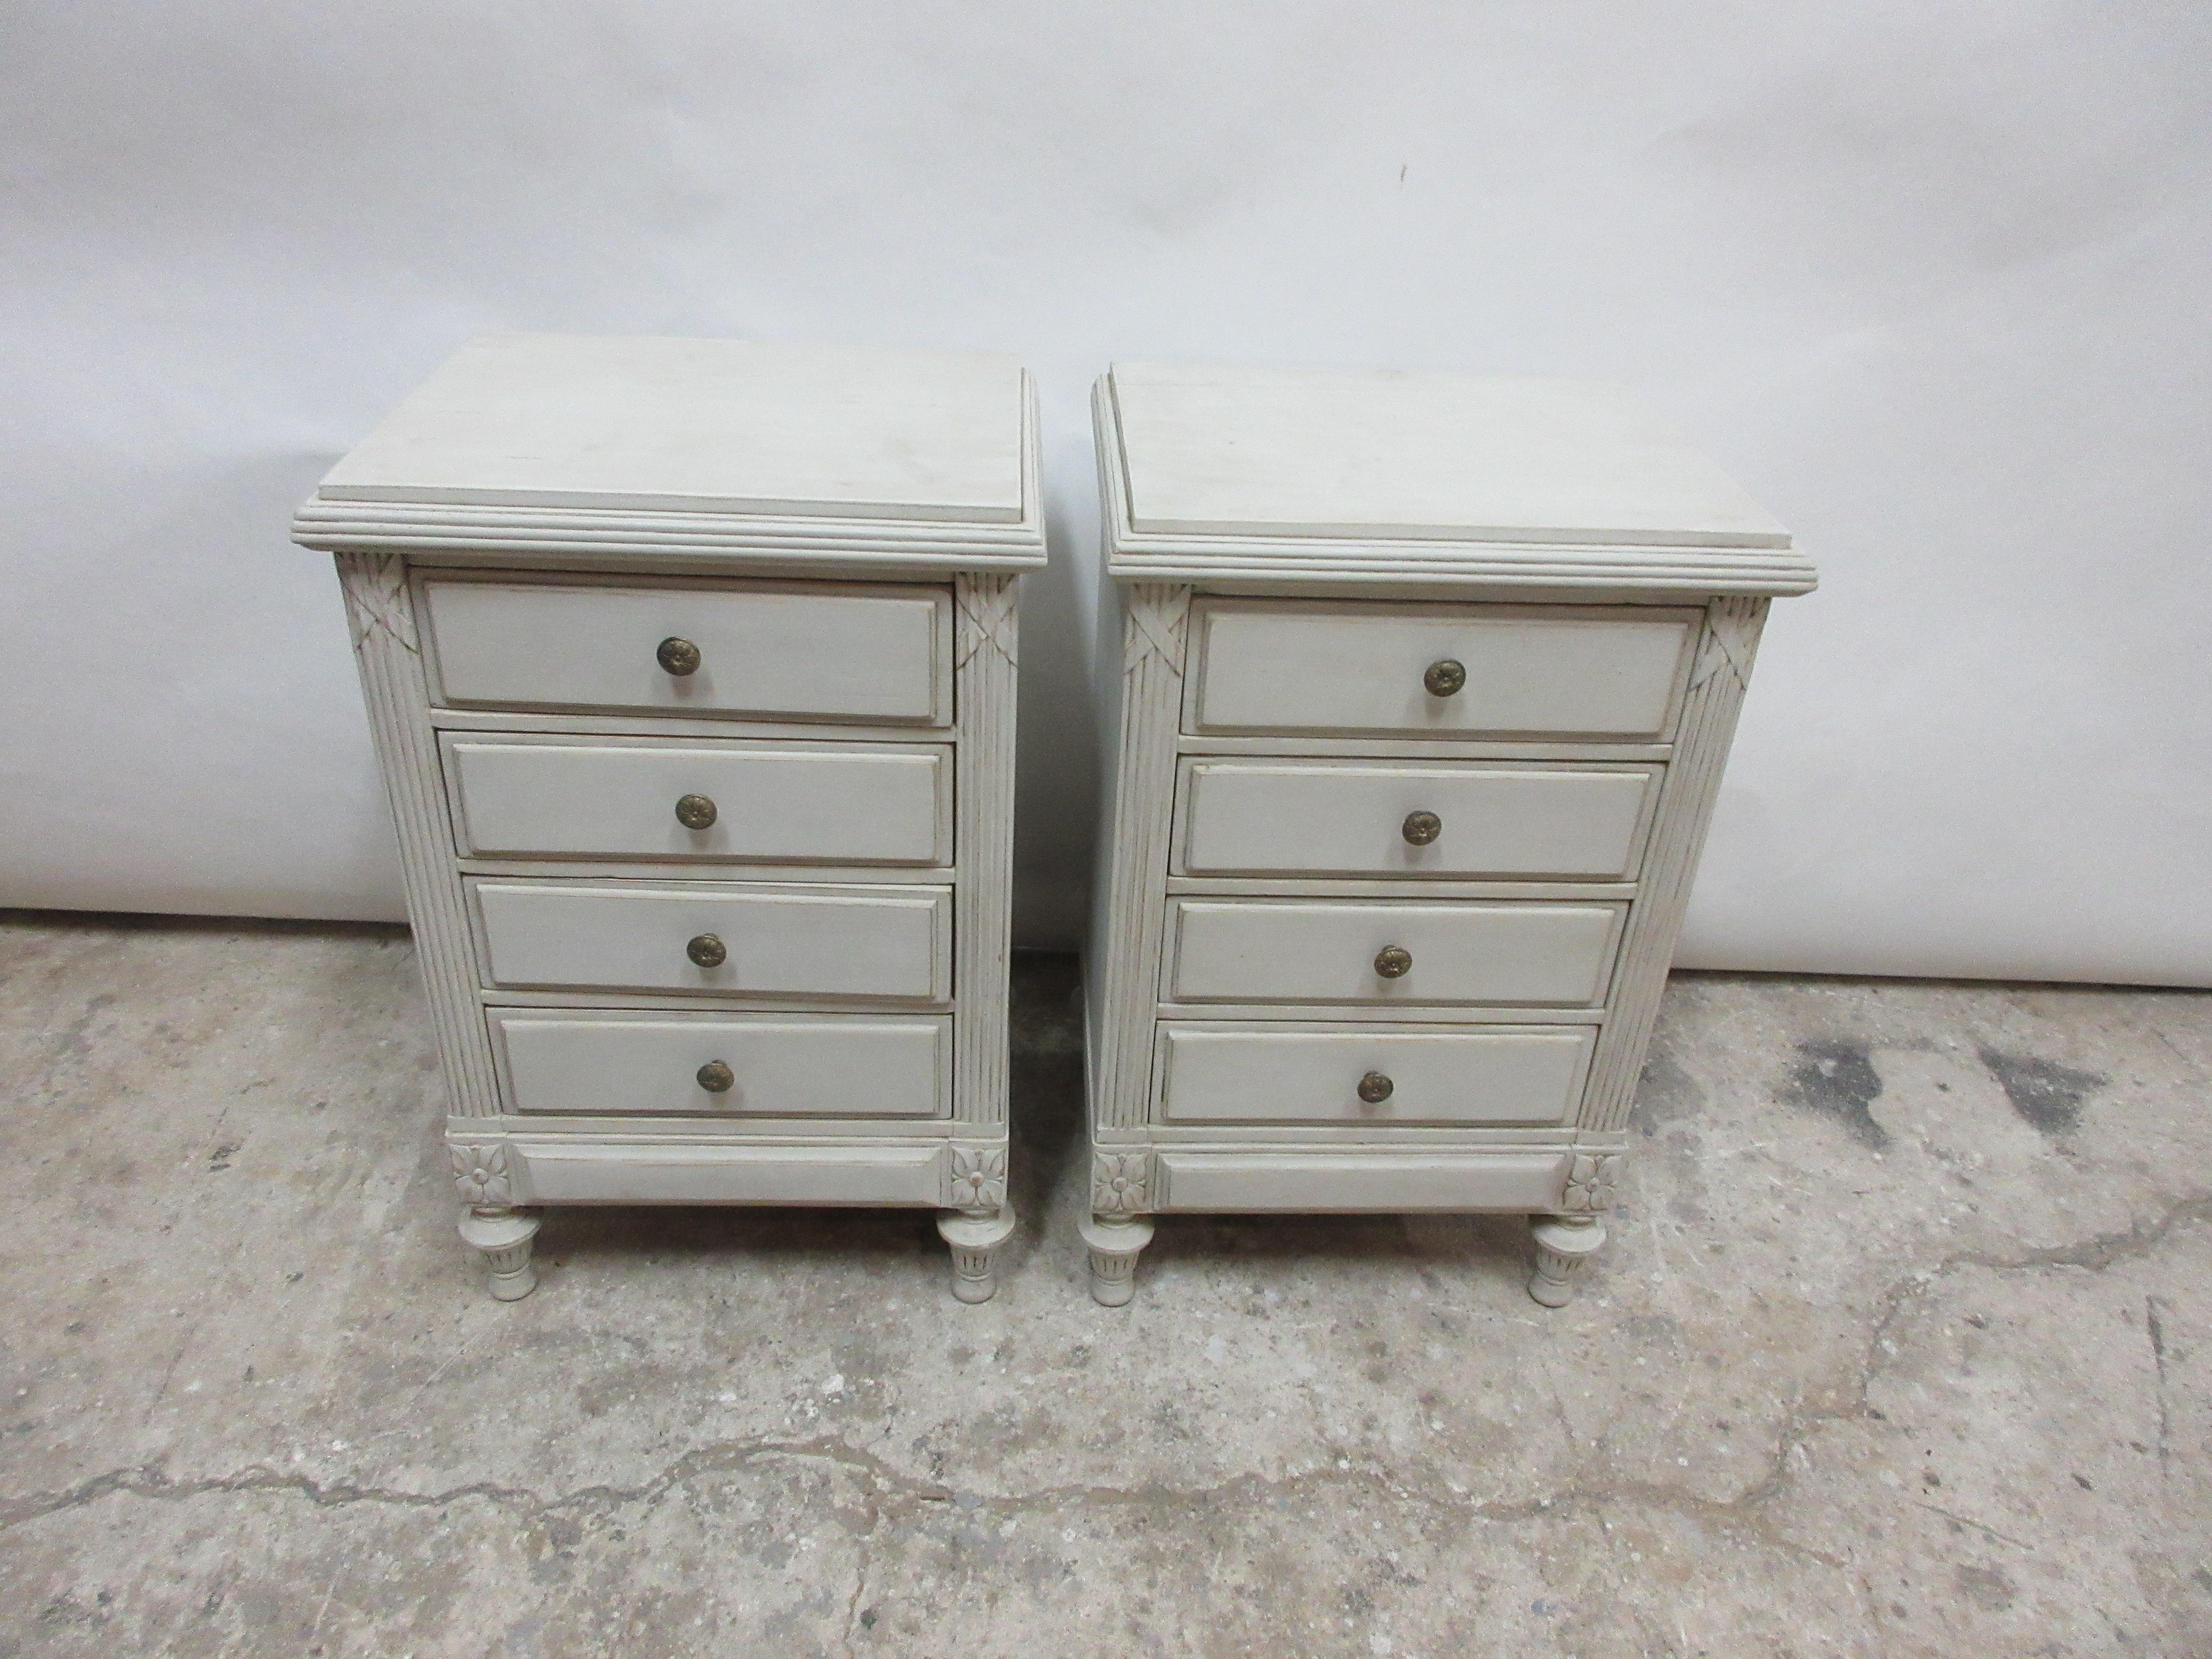 This is a set of 2 Swedish Gustavian nightstands, they have been restored and repainted with milk paints 